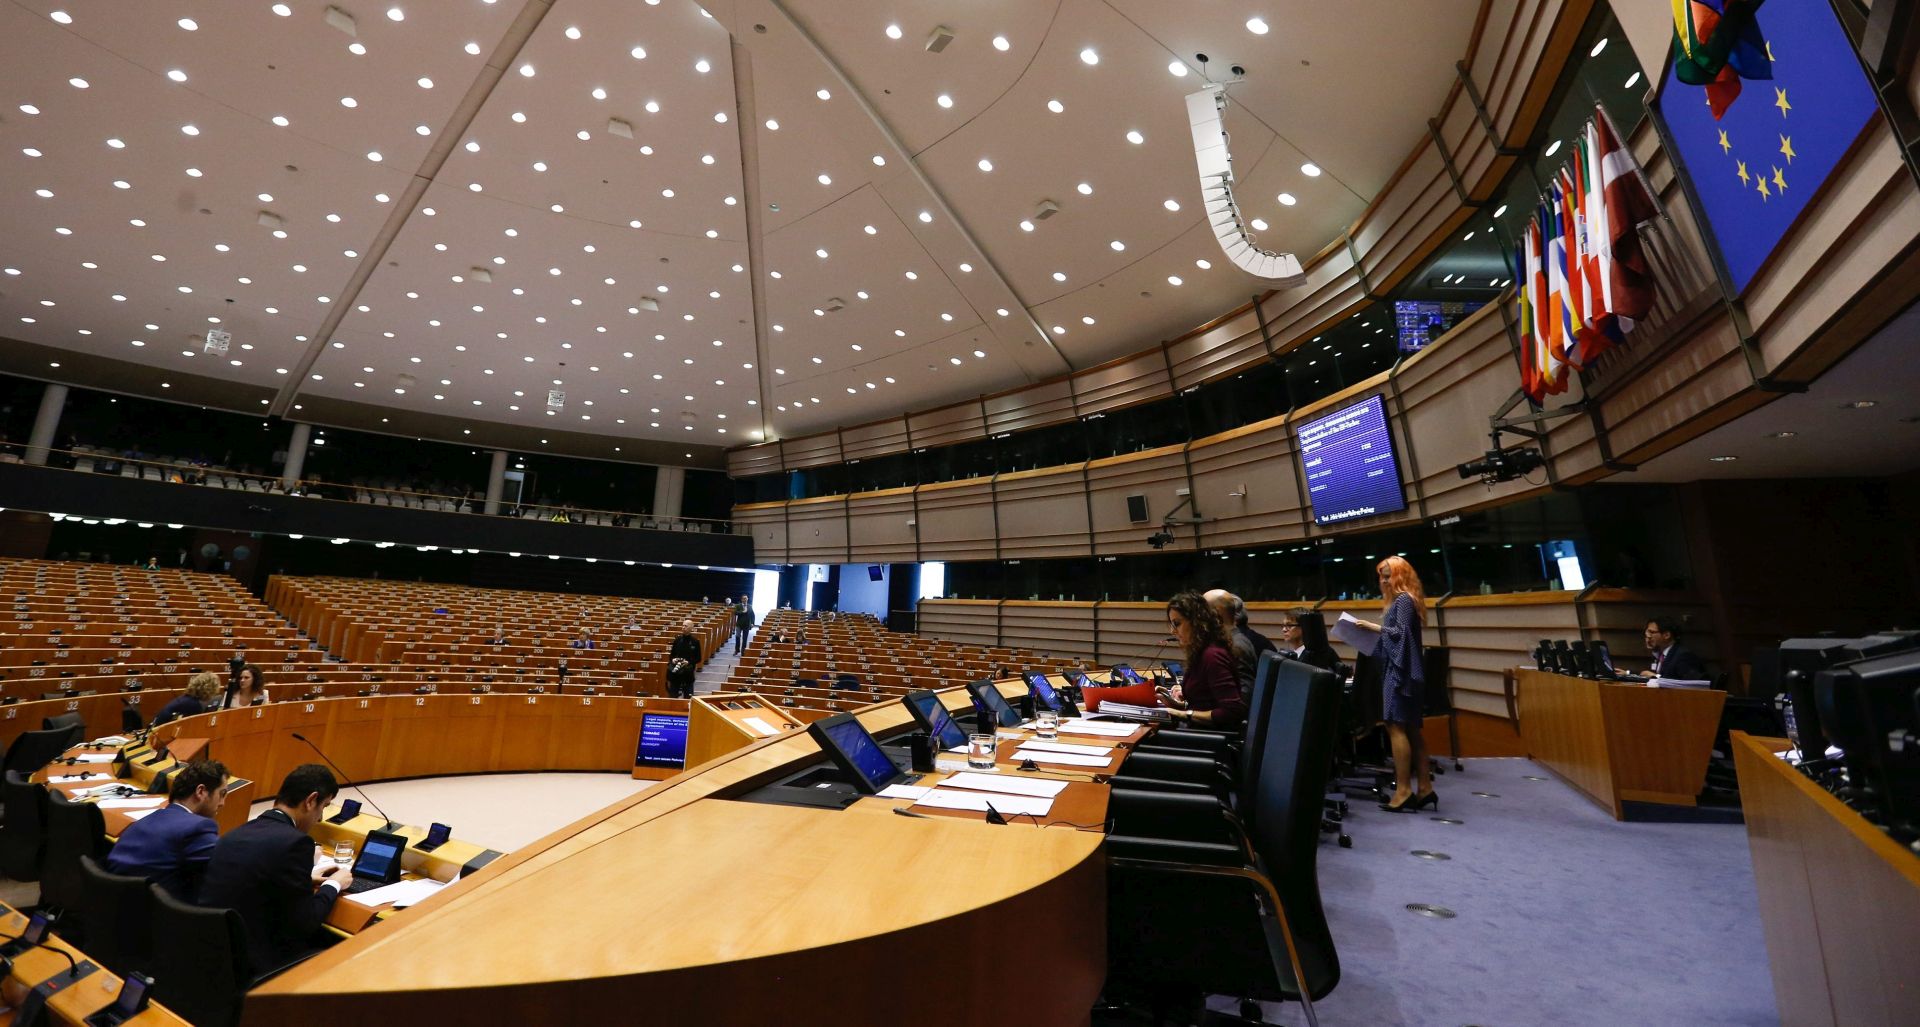 epa05280840 View of the Hemicyle during a plenary session at the European Parliament in Brussels, Belgium, 28 April 2016. Legal aspects, democratic control and implementation of the EU-Turkey agreement - Council and Commission statements  EPA/LAURENT DUBRULE